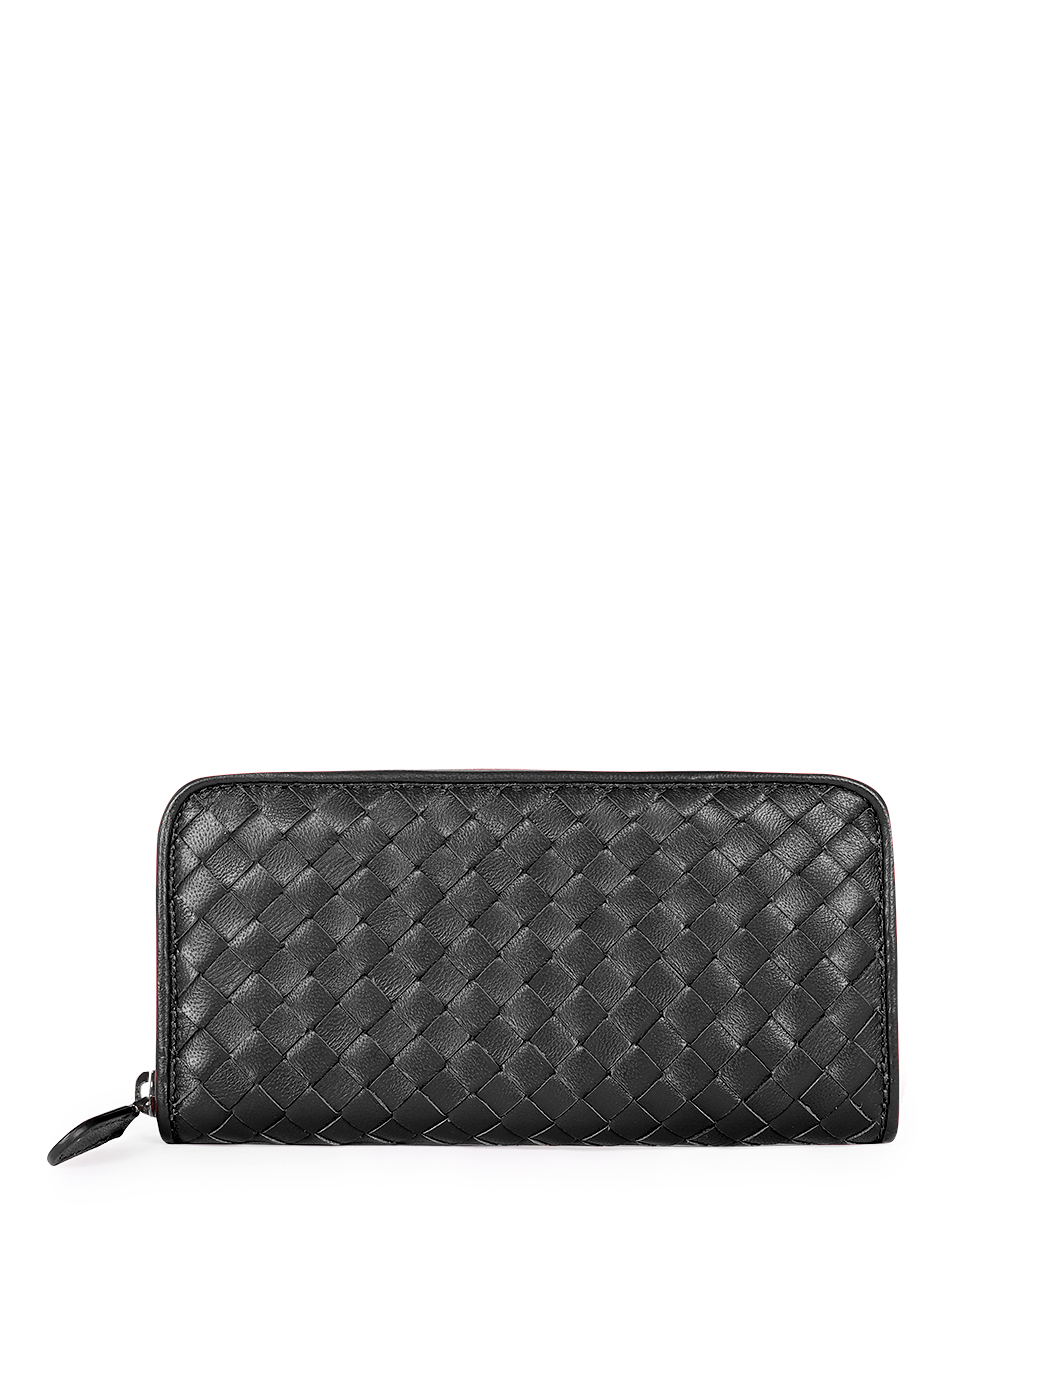 Long zip-around wallet in black woven leather